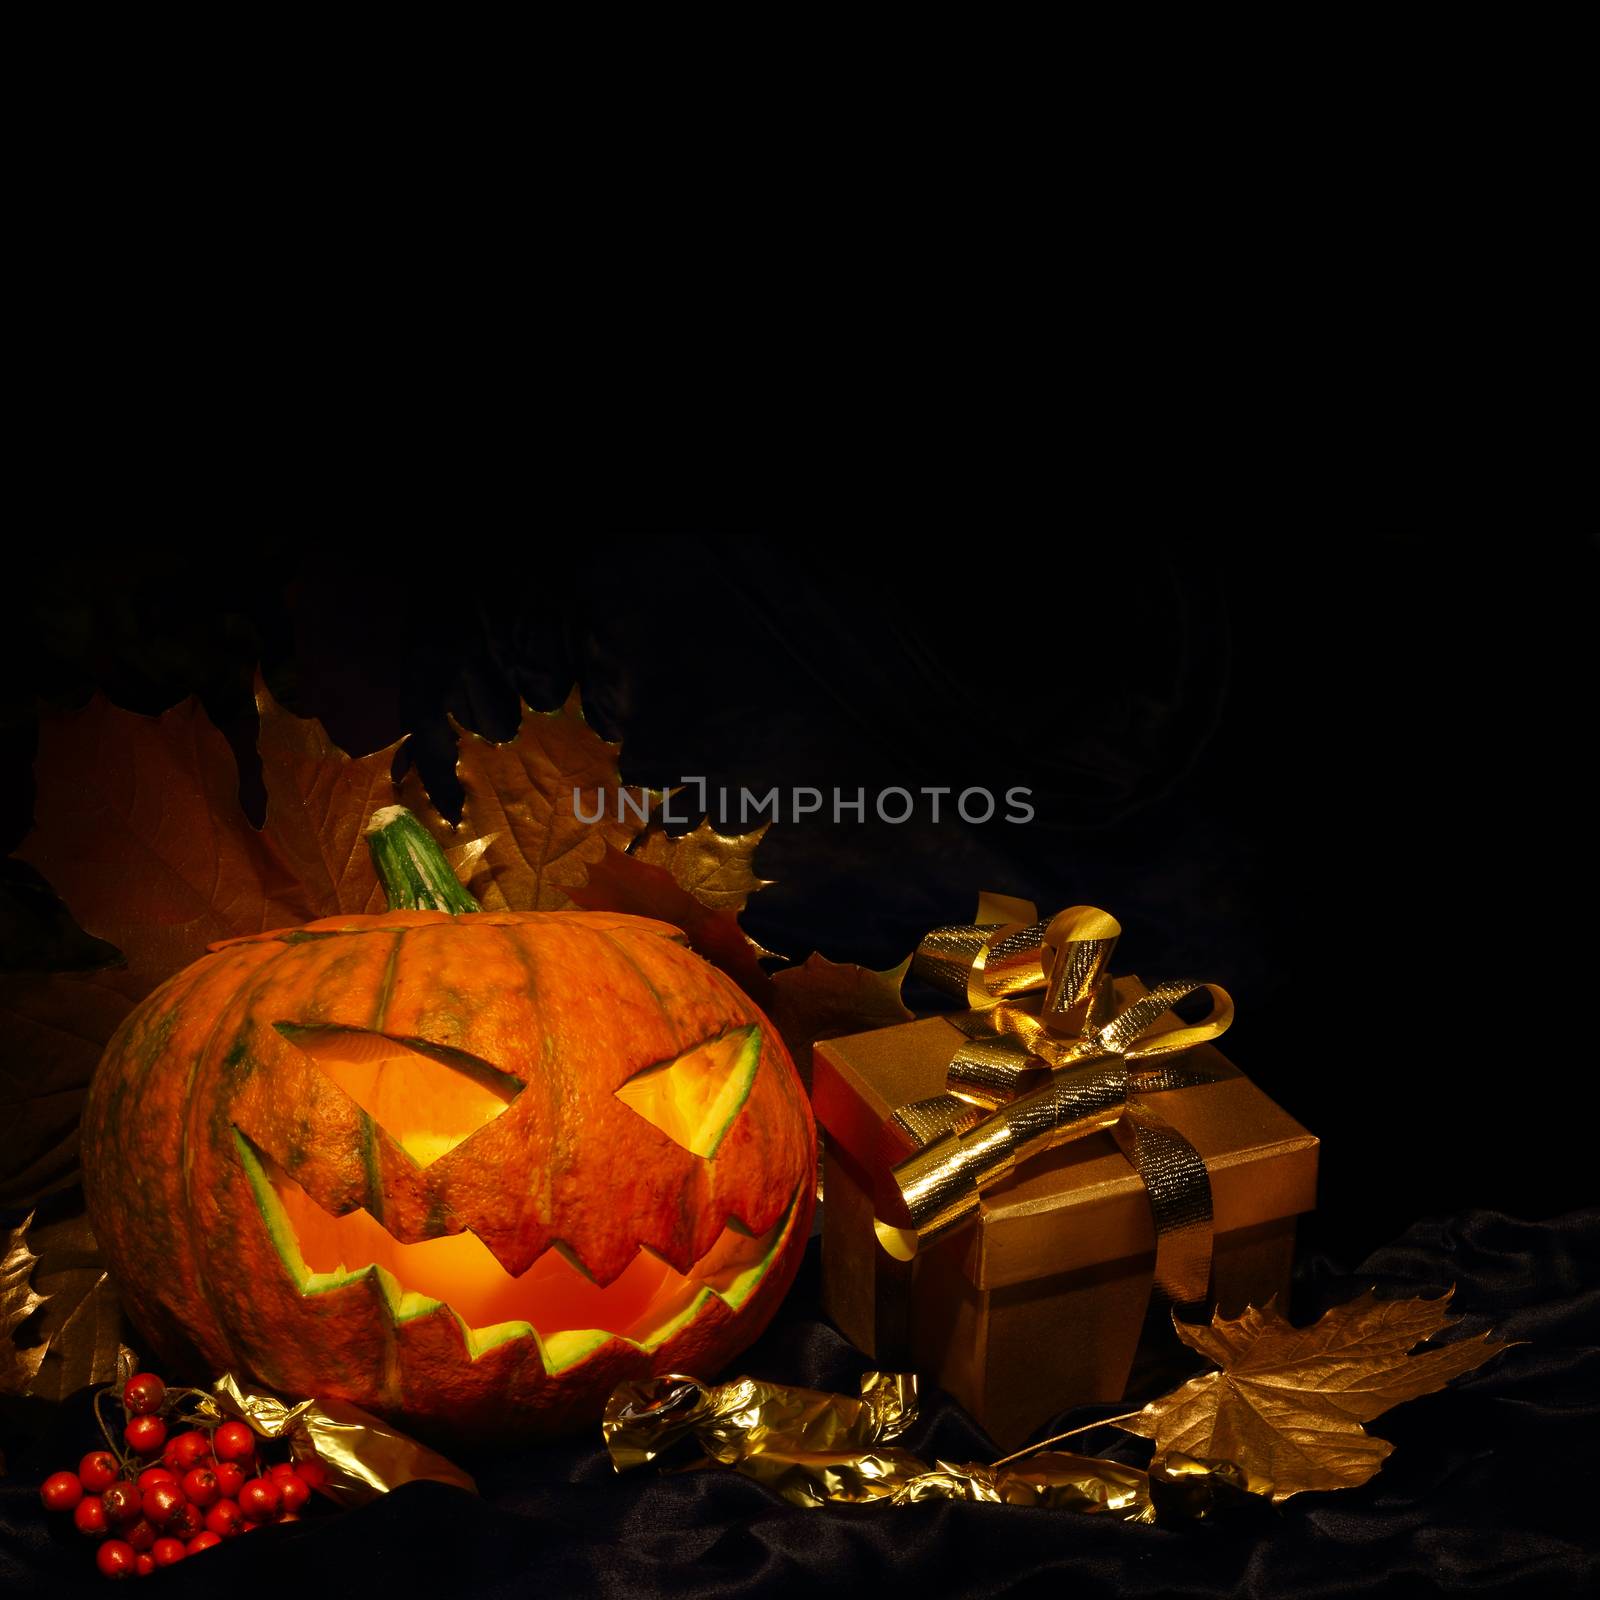 Halloween pumpkin with autumn leafs and gift on black